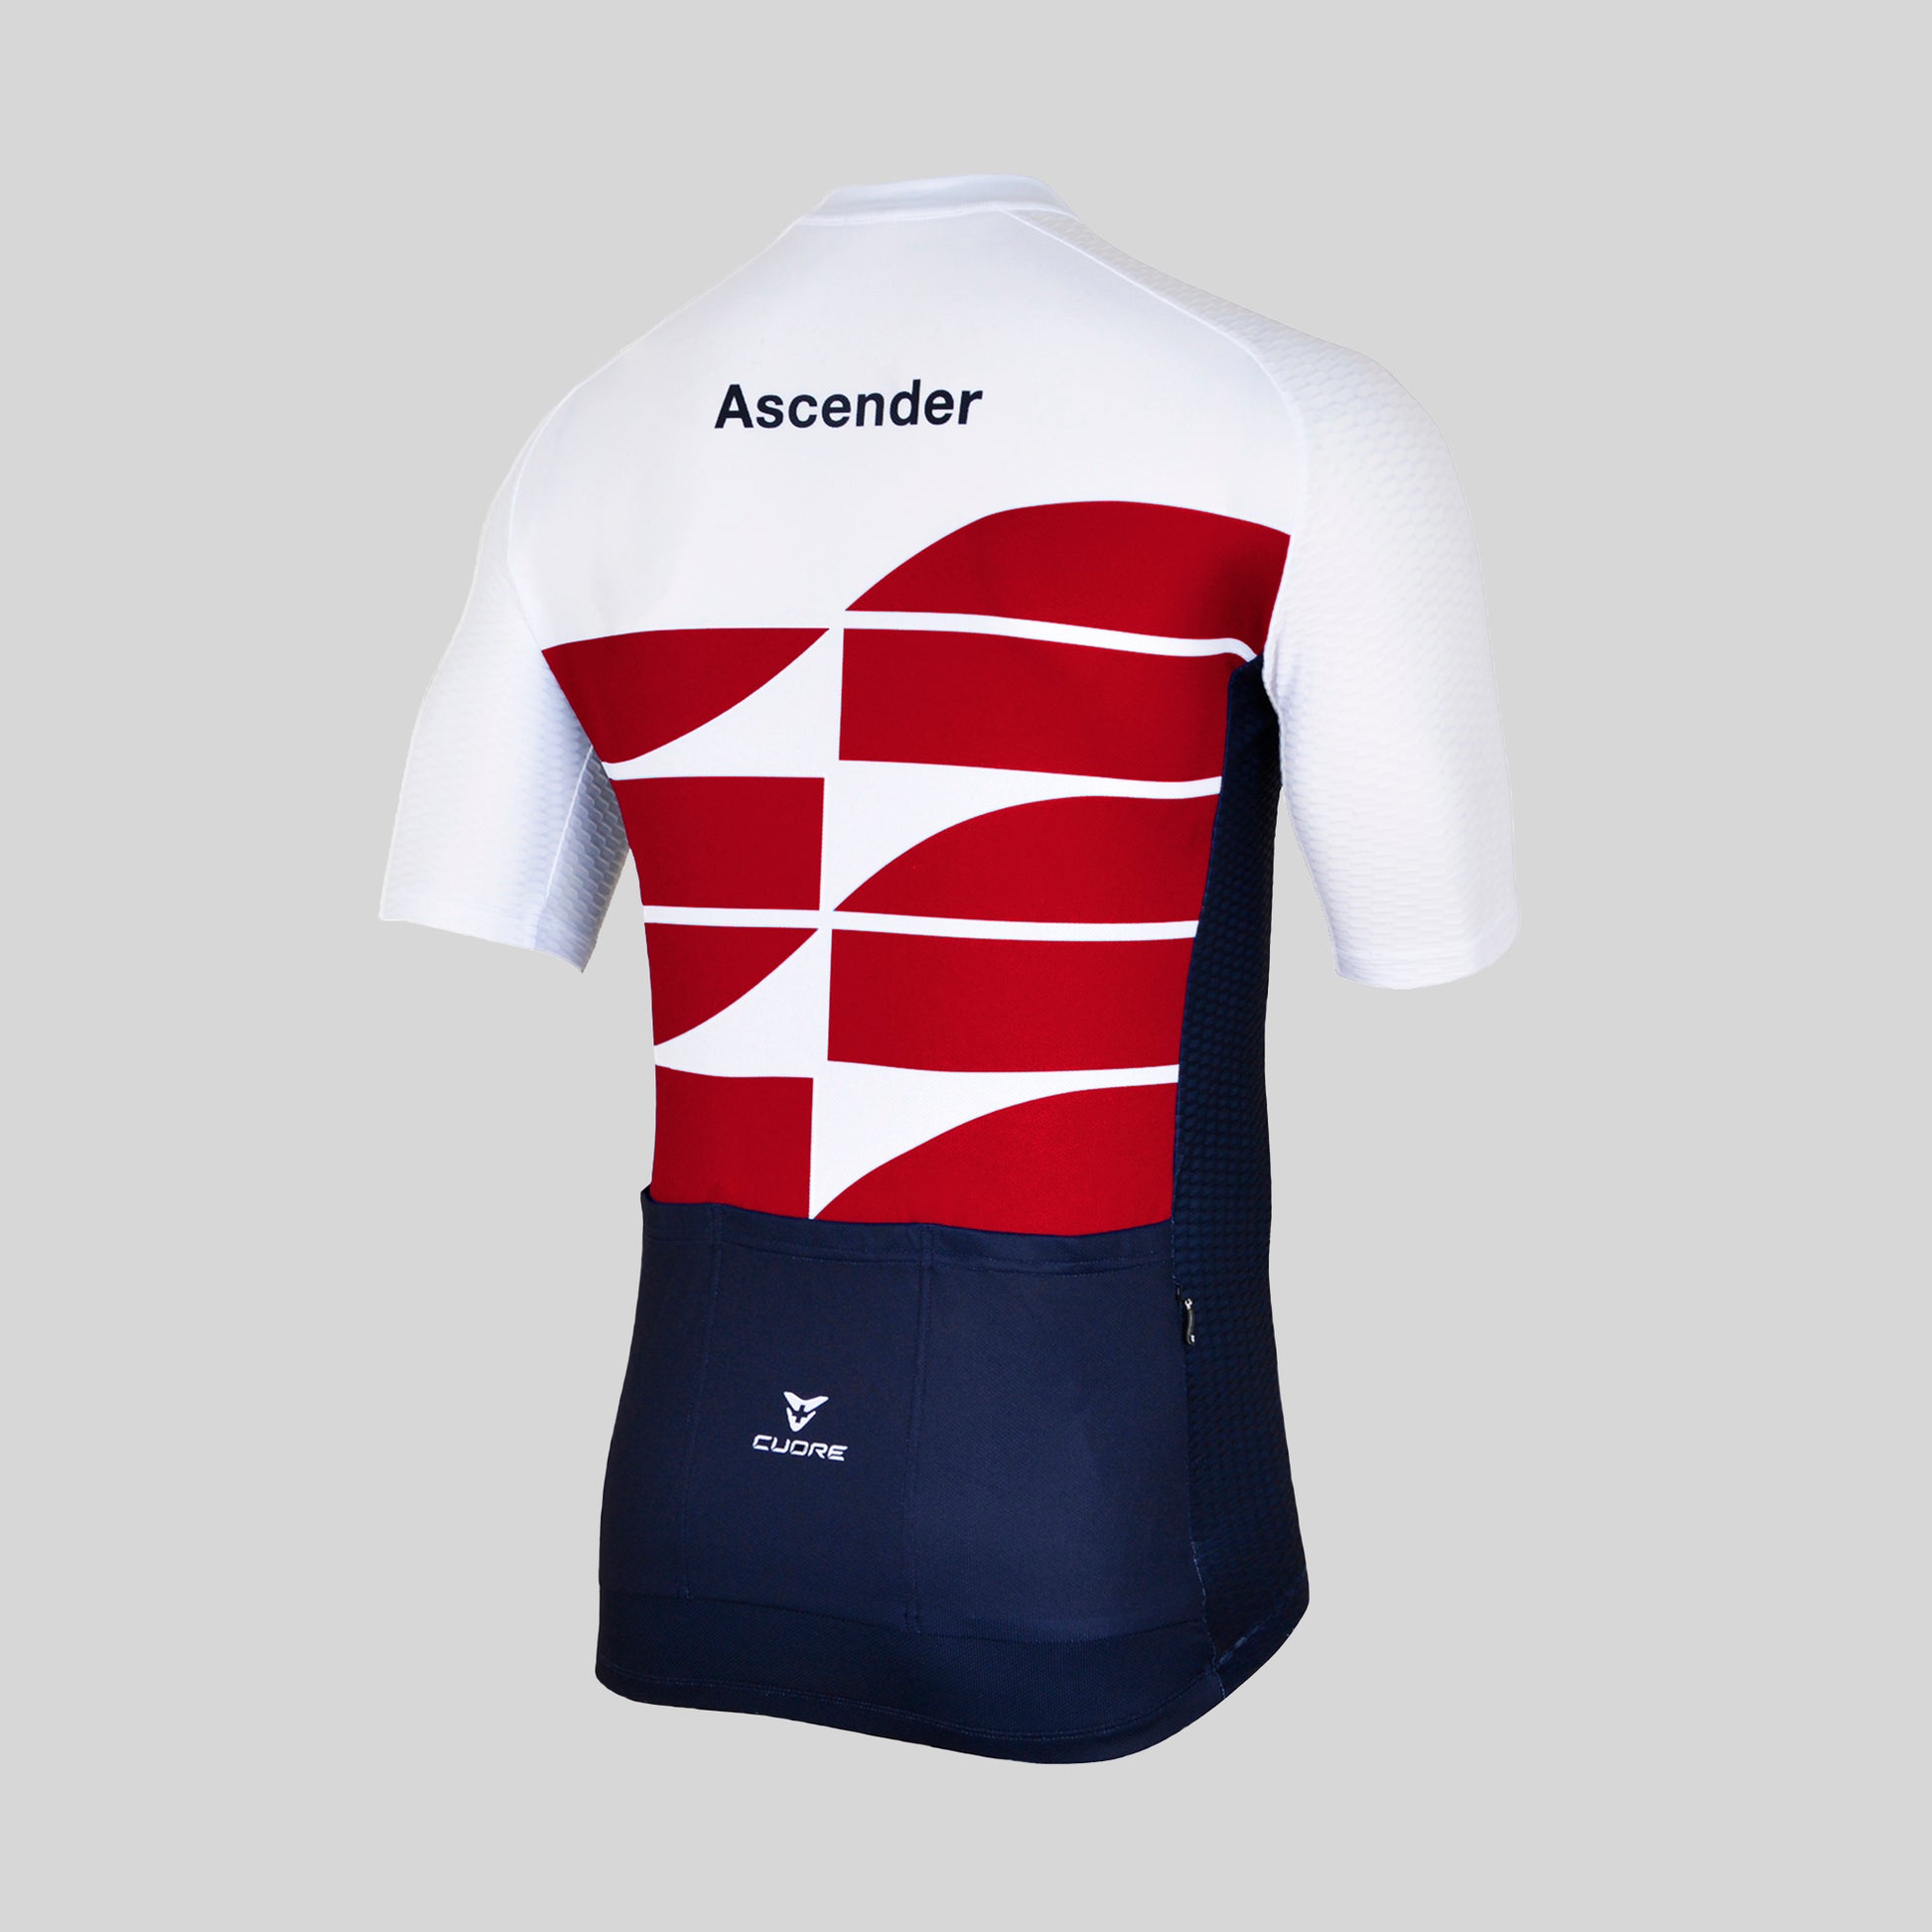 Mountain Edition Short Sleeves Jersey Bordeaux from Ascender Cycling Club Zürich and Cuore of Switzerland 3D Back View